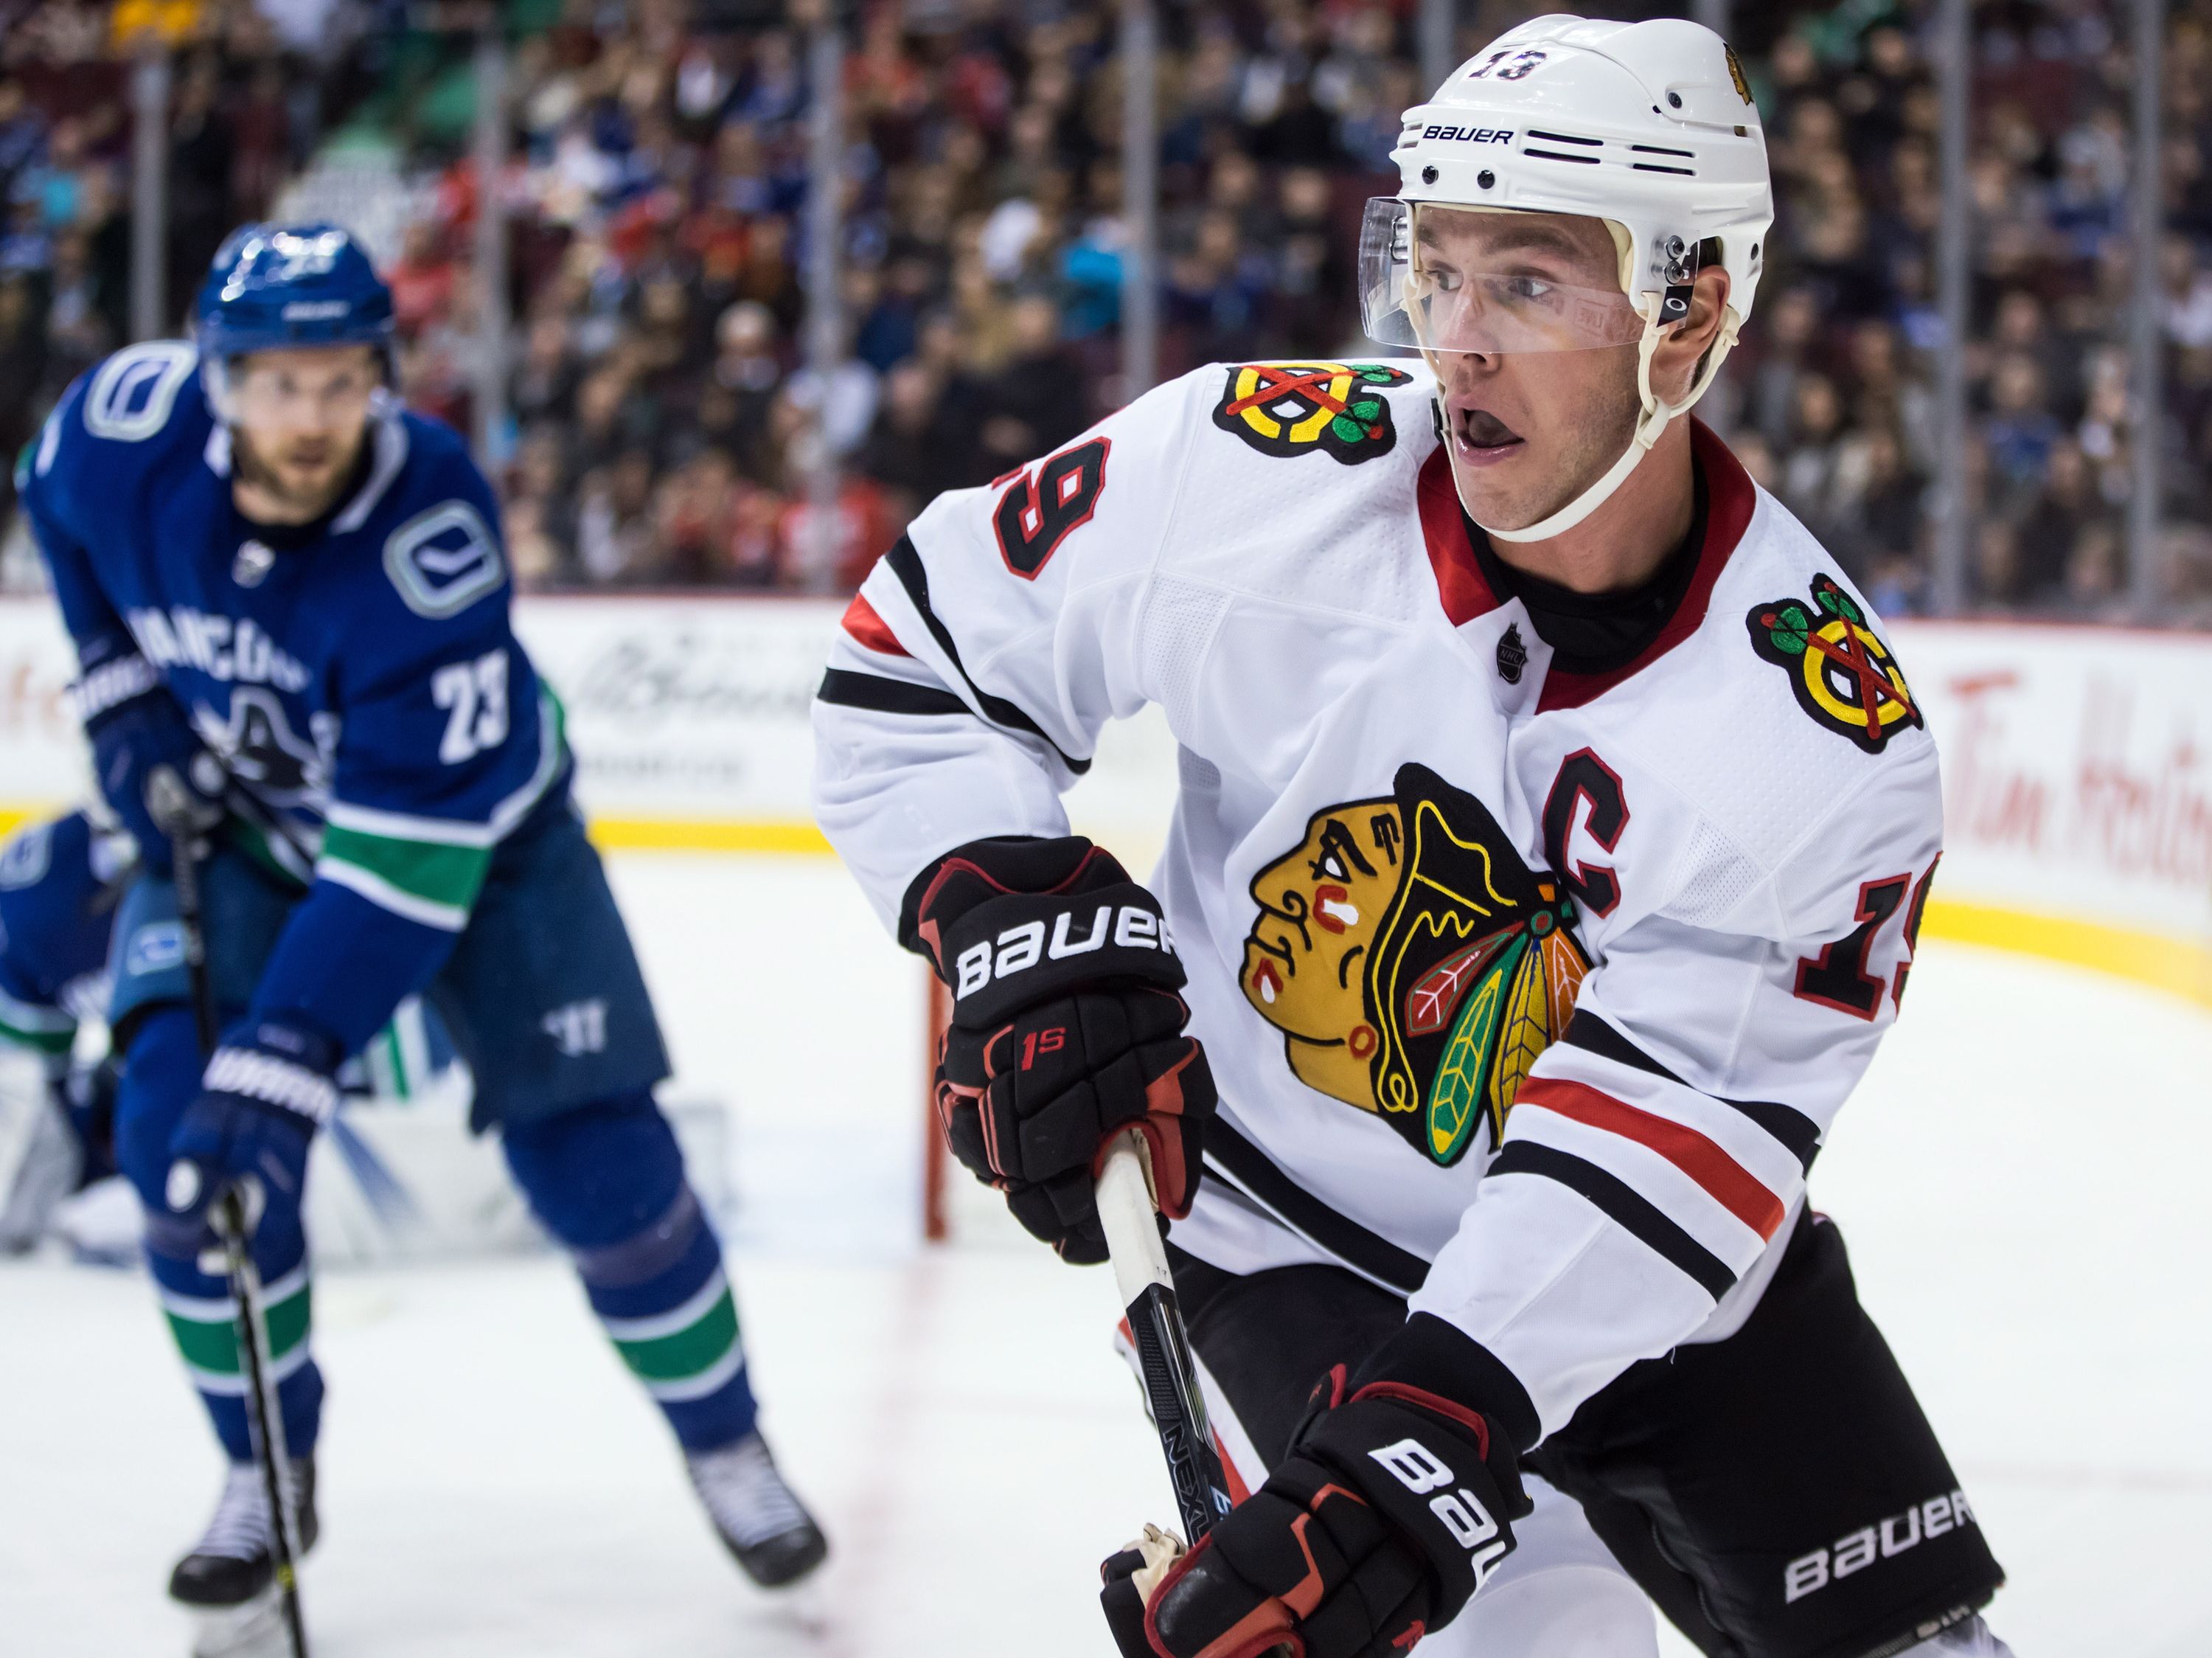 chicagoblackhawks captain Jonathan Toews says he's continuing to deal